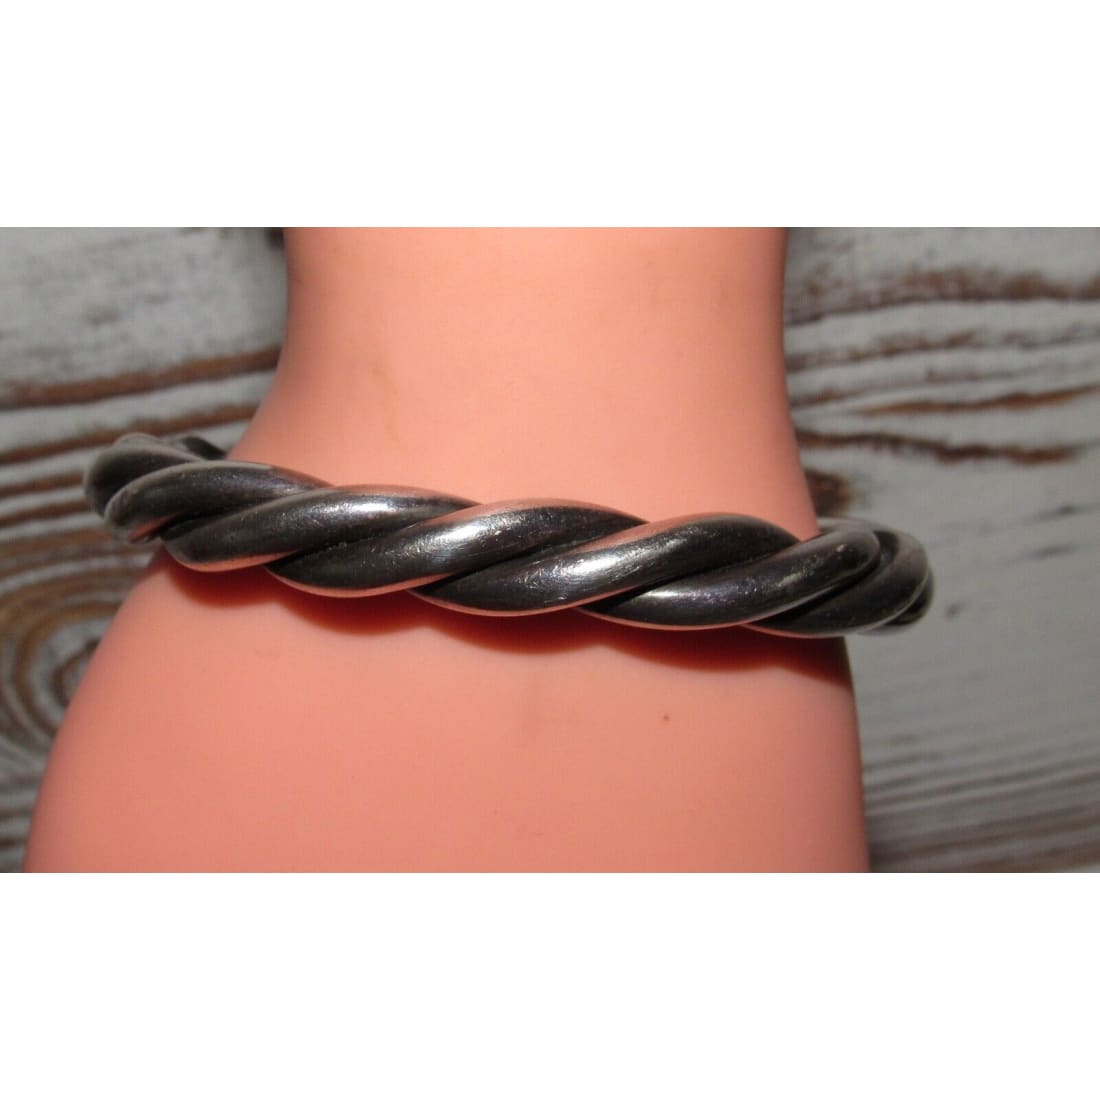 VTG Mexican Twisted Rope Sterling Silver 925 Bracelet Cuff 7